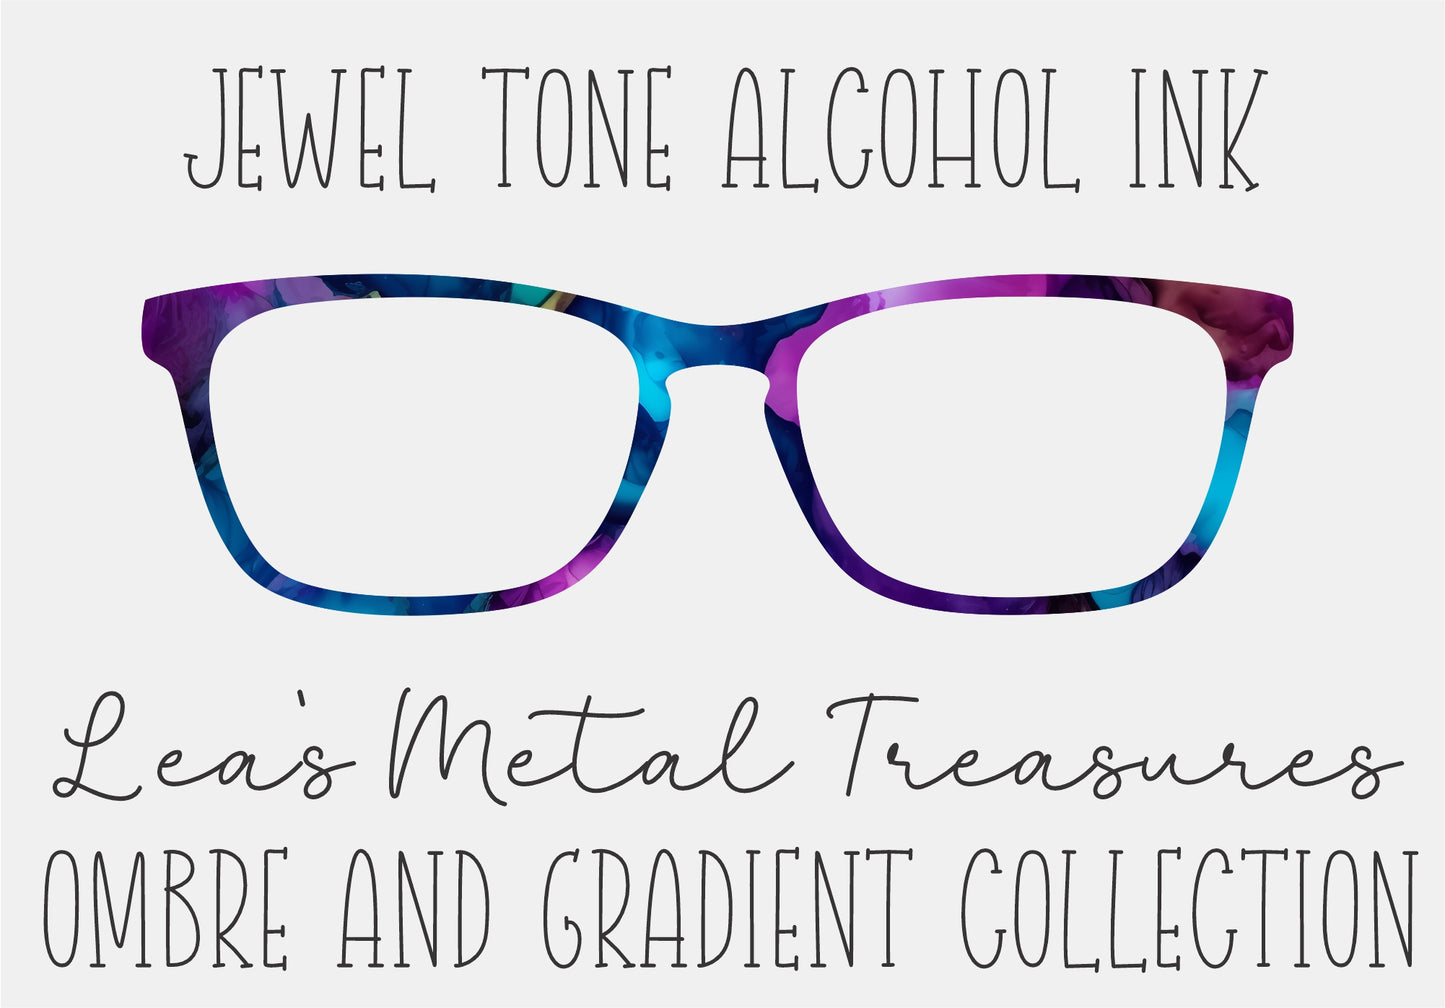 JEWEL TONE ALCOHOL INK Eyewear Frame Toppers COMES WITH MAGNETS